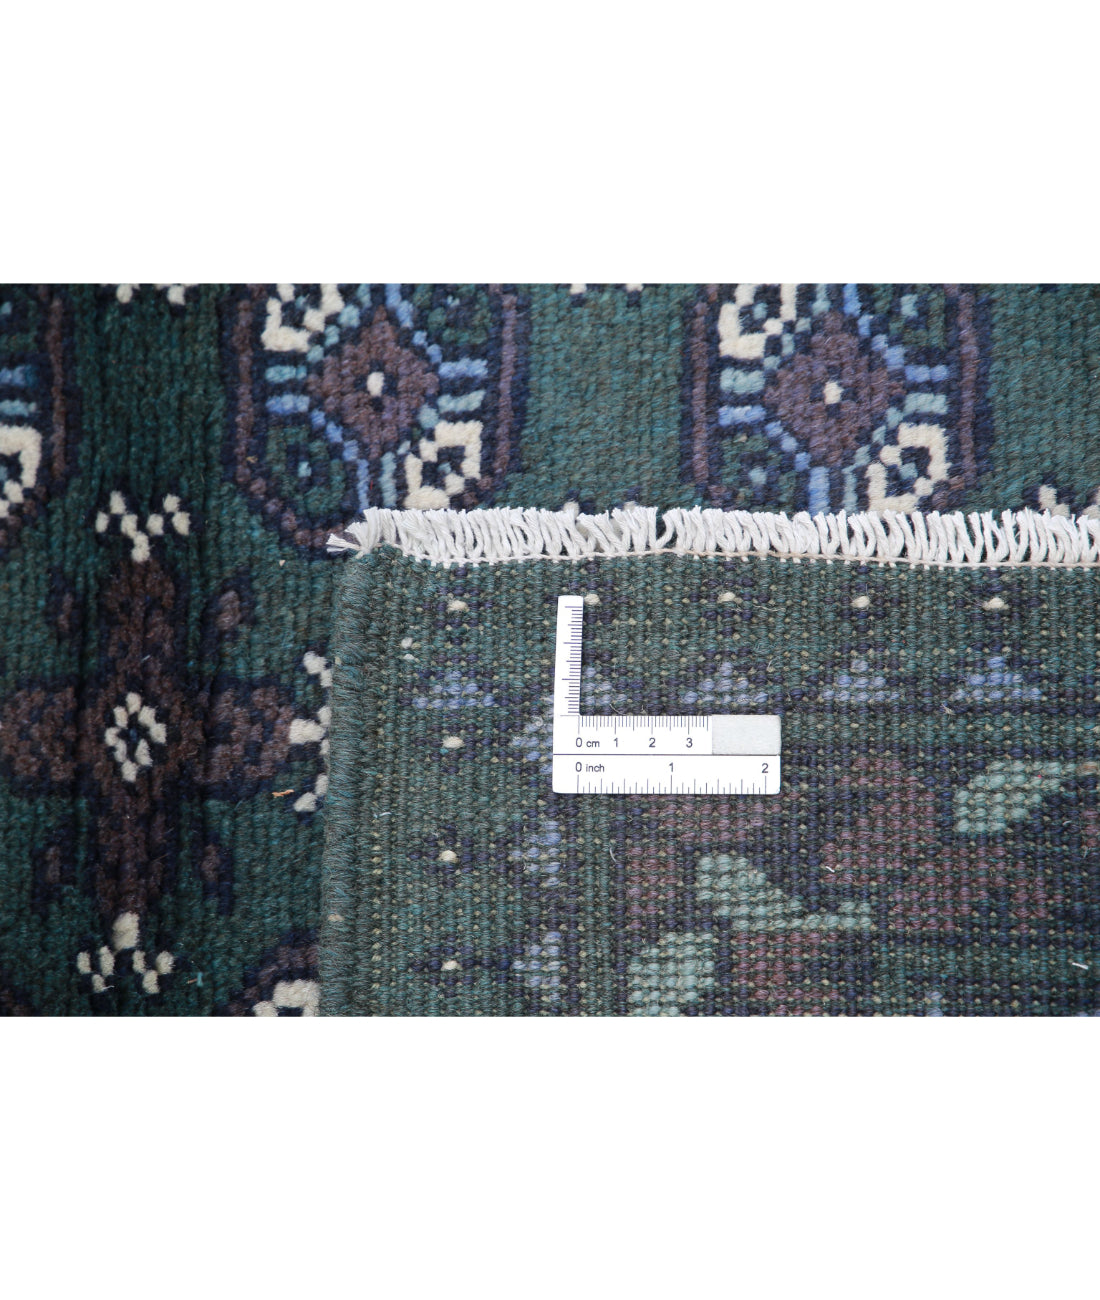 Revival 3'6'' X 4'7'' Hand-Knotted Wool Rug 3'6'' x 4'7'' (105 X 138) / Green / Blue